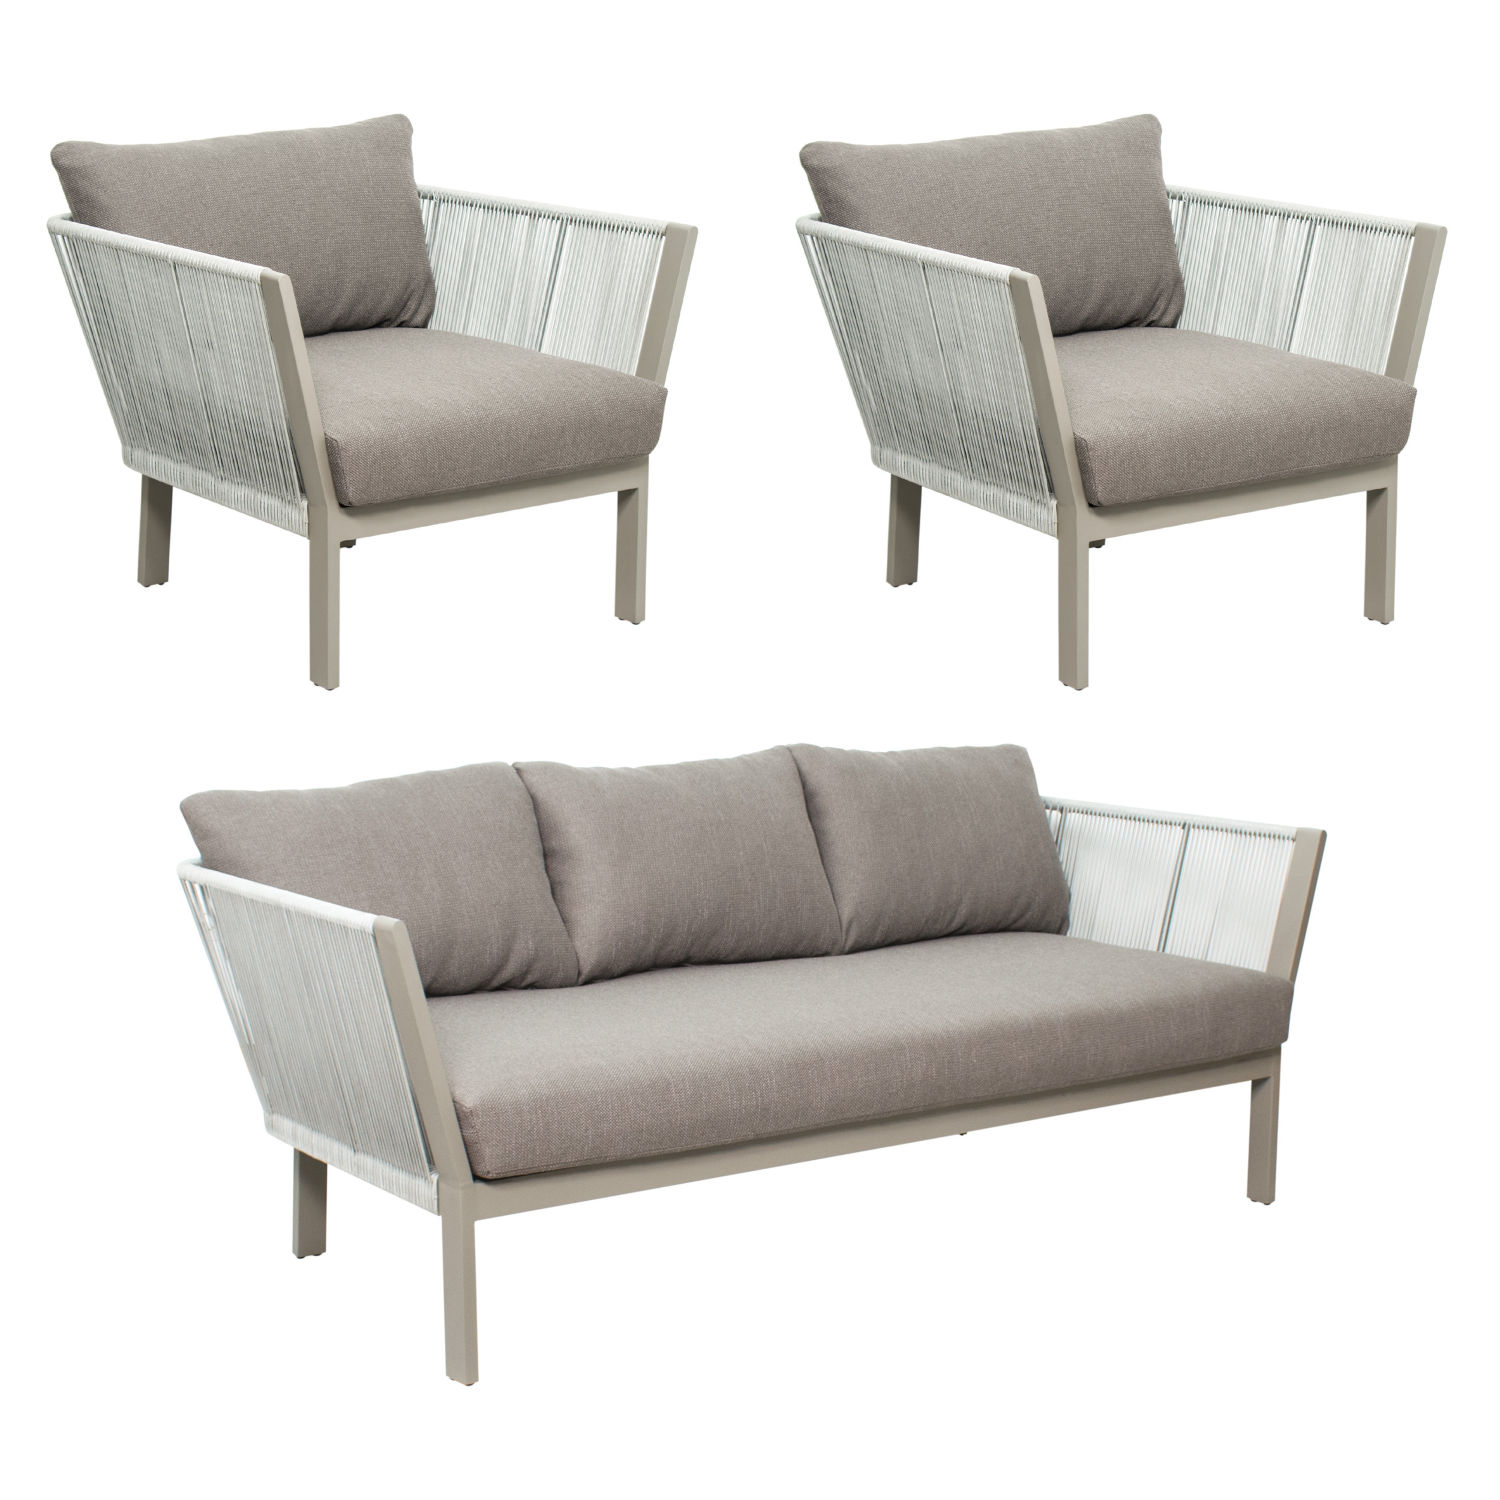 Patio Furniture Sets Category